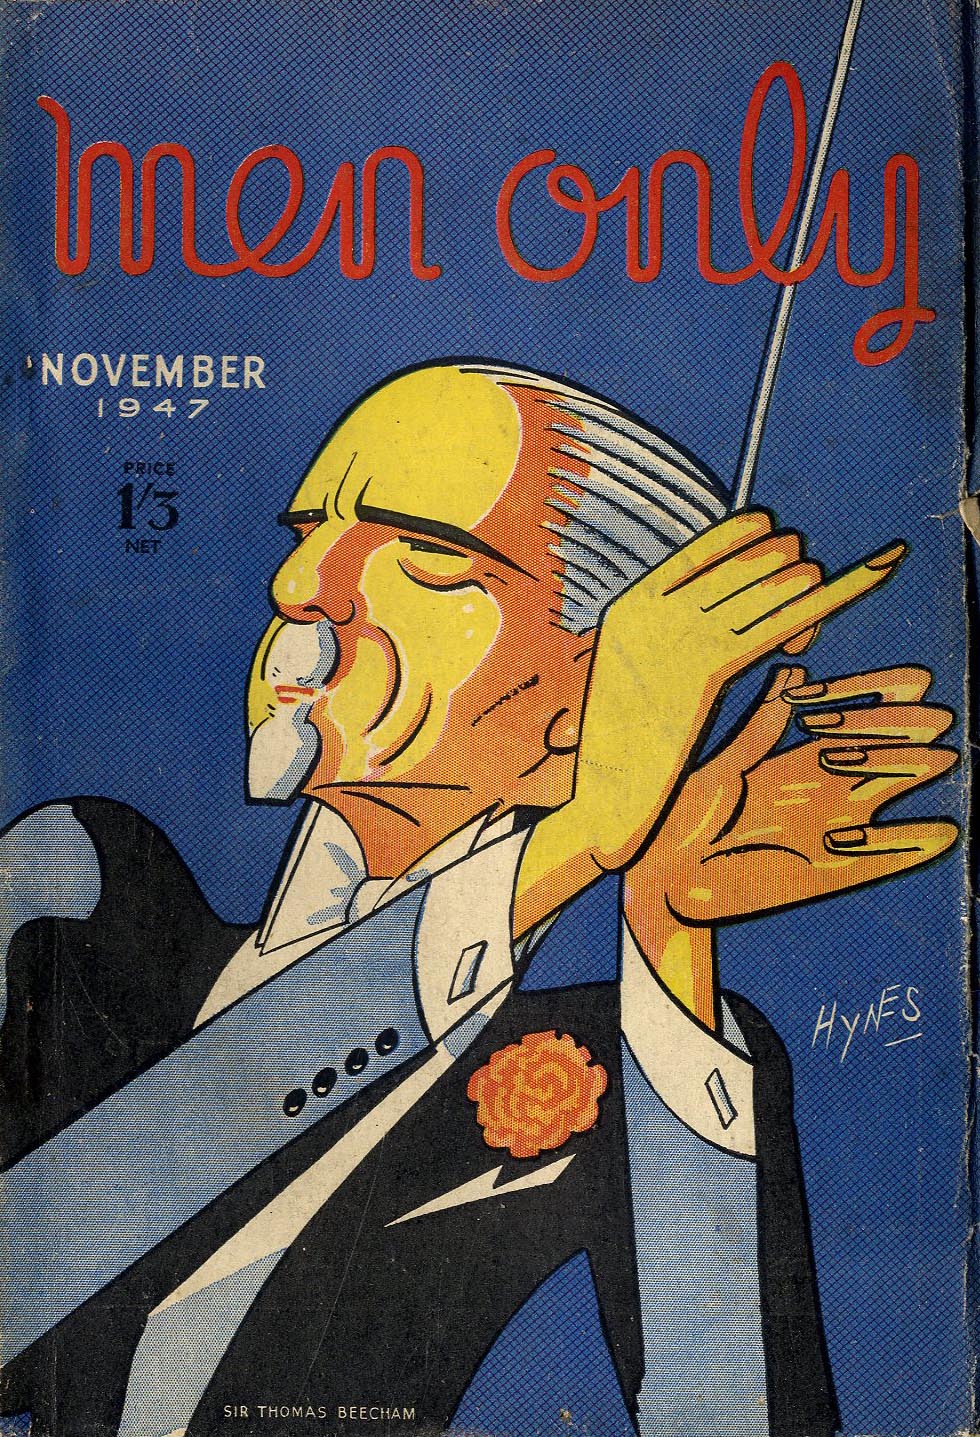 Magaizne cover featuring a sharp, stylised drawing of an orchestra conductor in white-tie, holding his baton. Text reads "men only / November 1947"